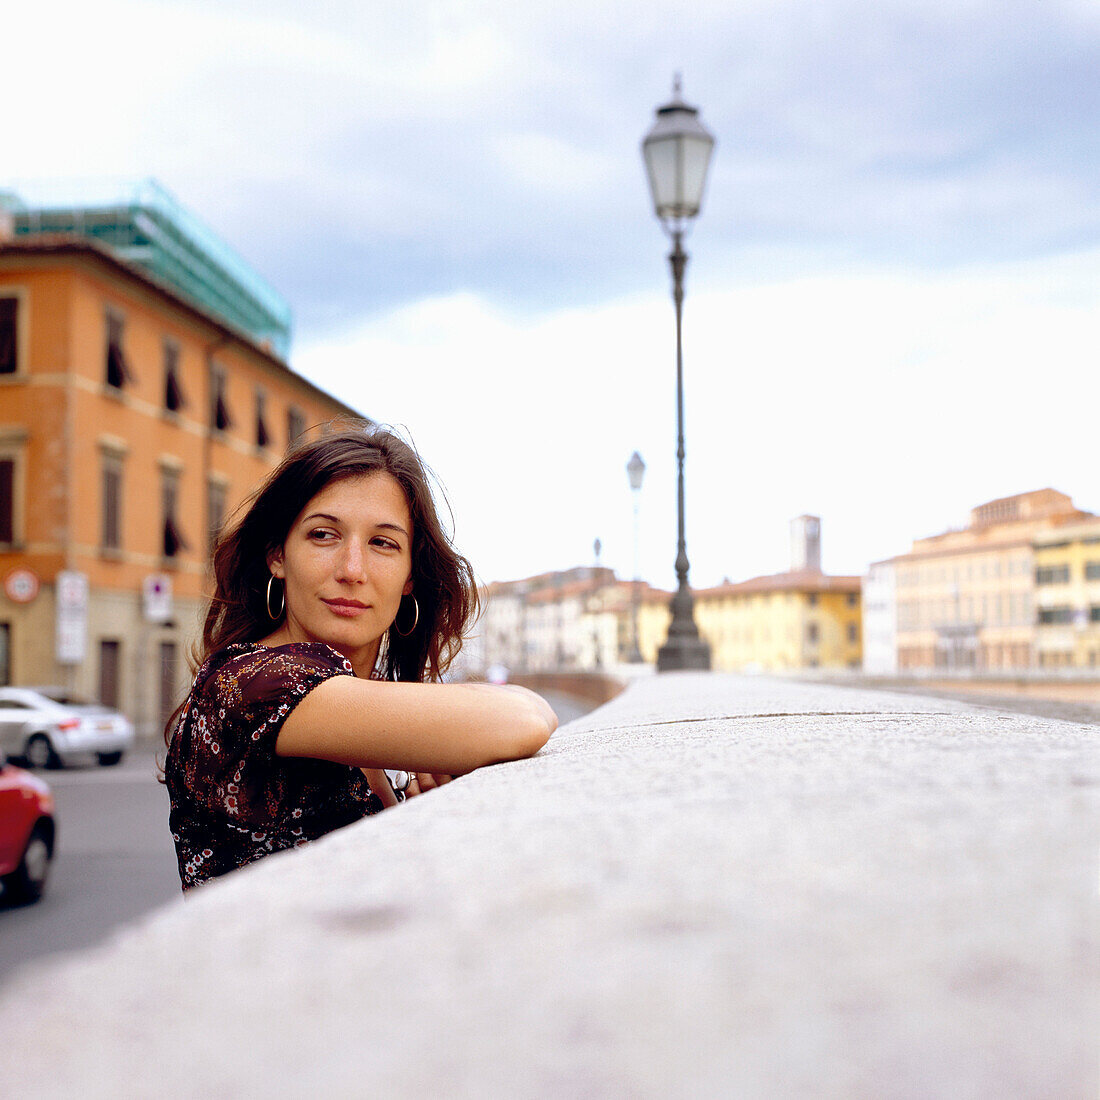 Young woman leaning against wall, Pisa, Italy